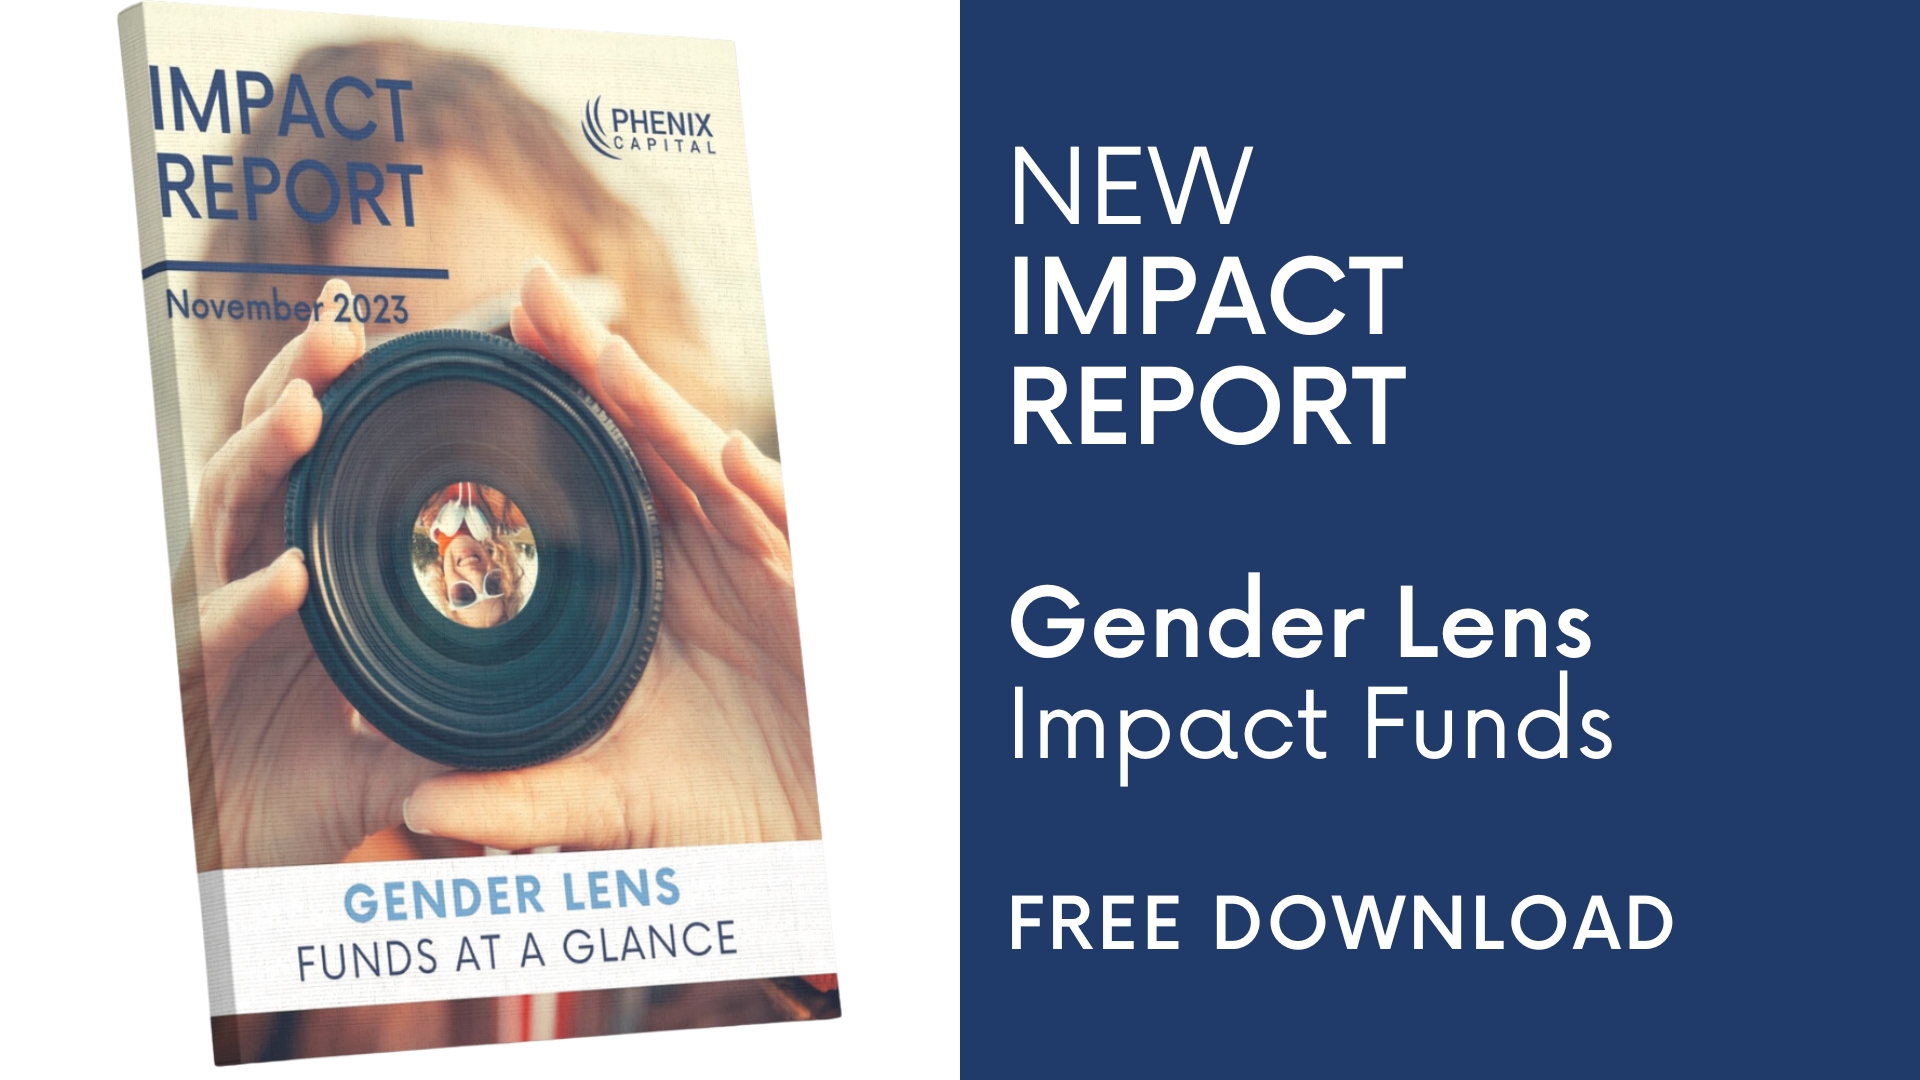 PRESS RELEASE: New report on Gender Lens Impact Funds